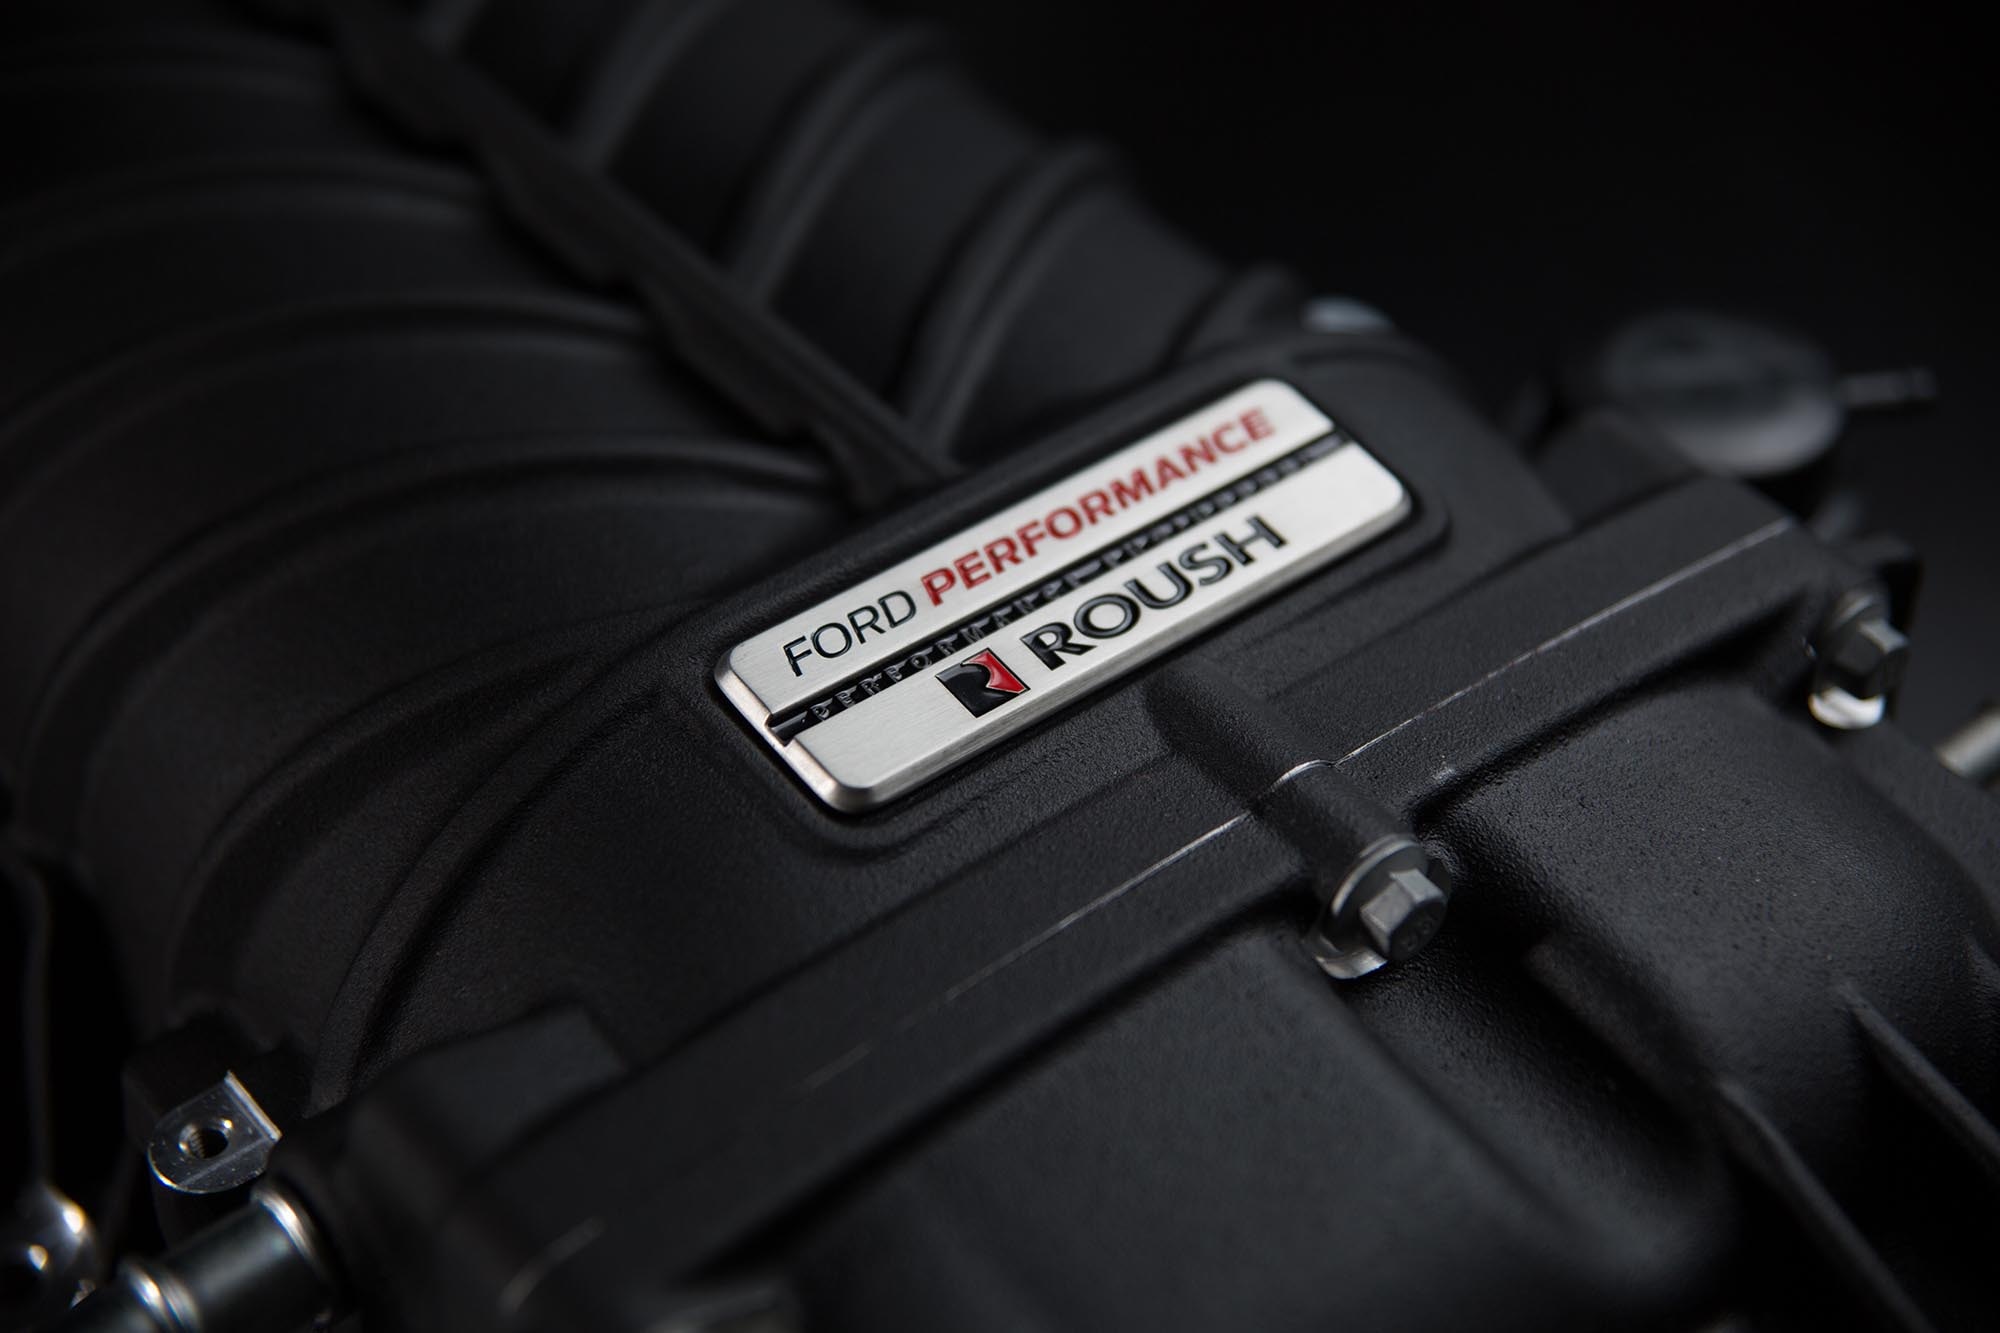 Detail shot of the Roush supercharger developed for the 2018 Ford Mustang and F-150